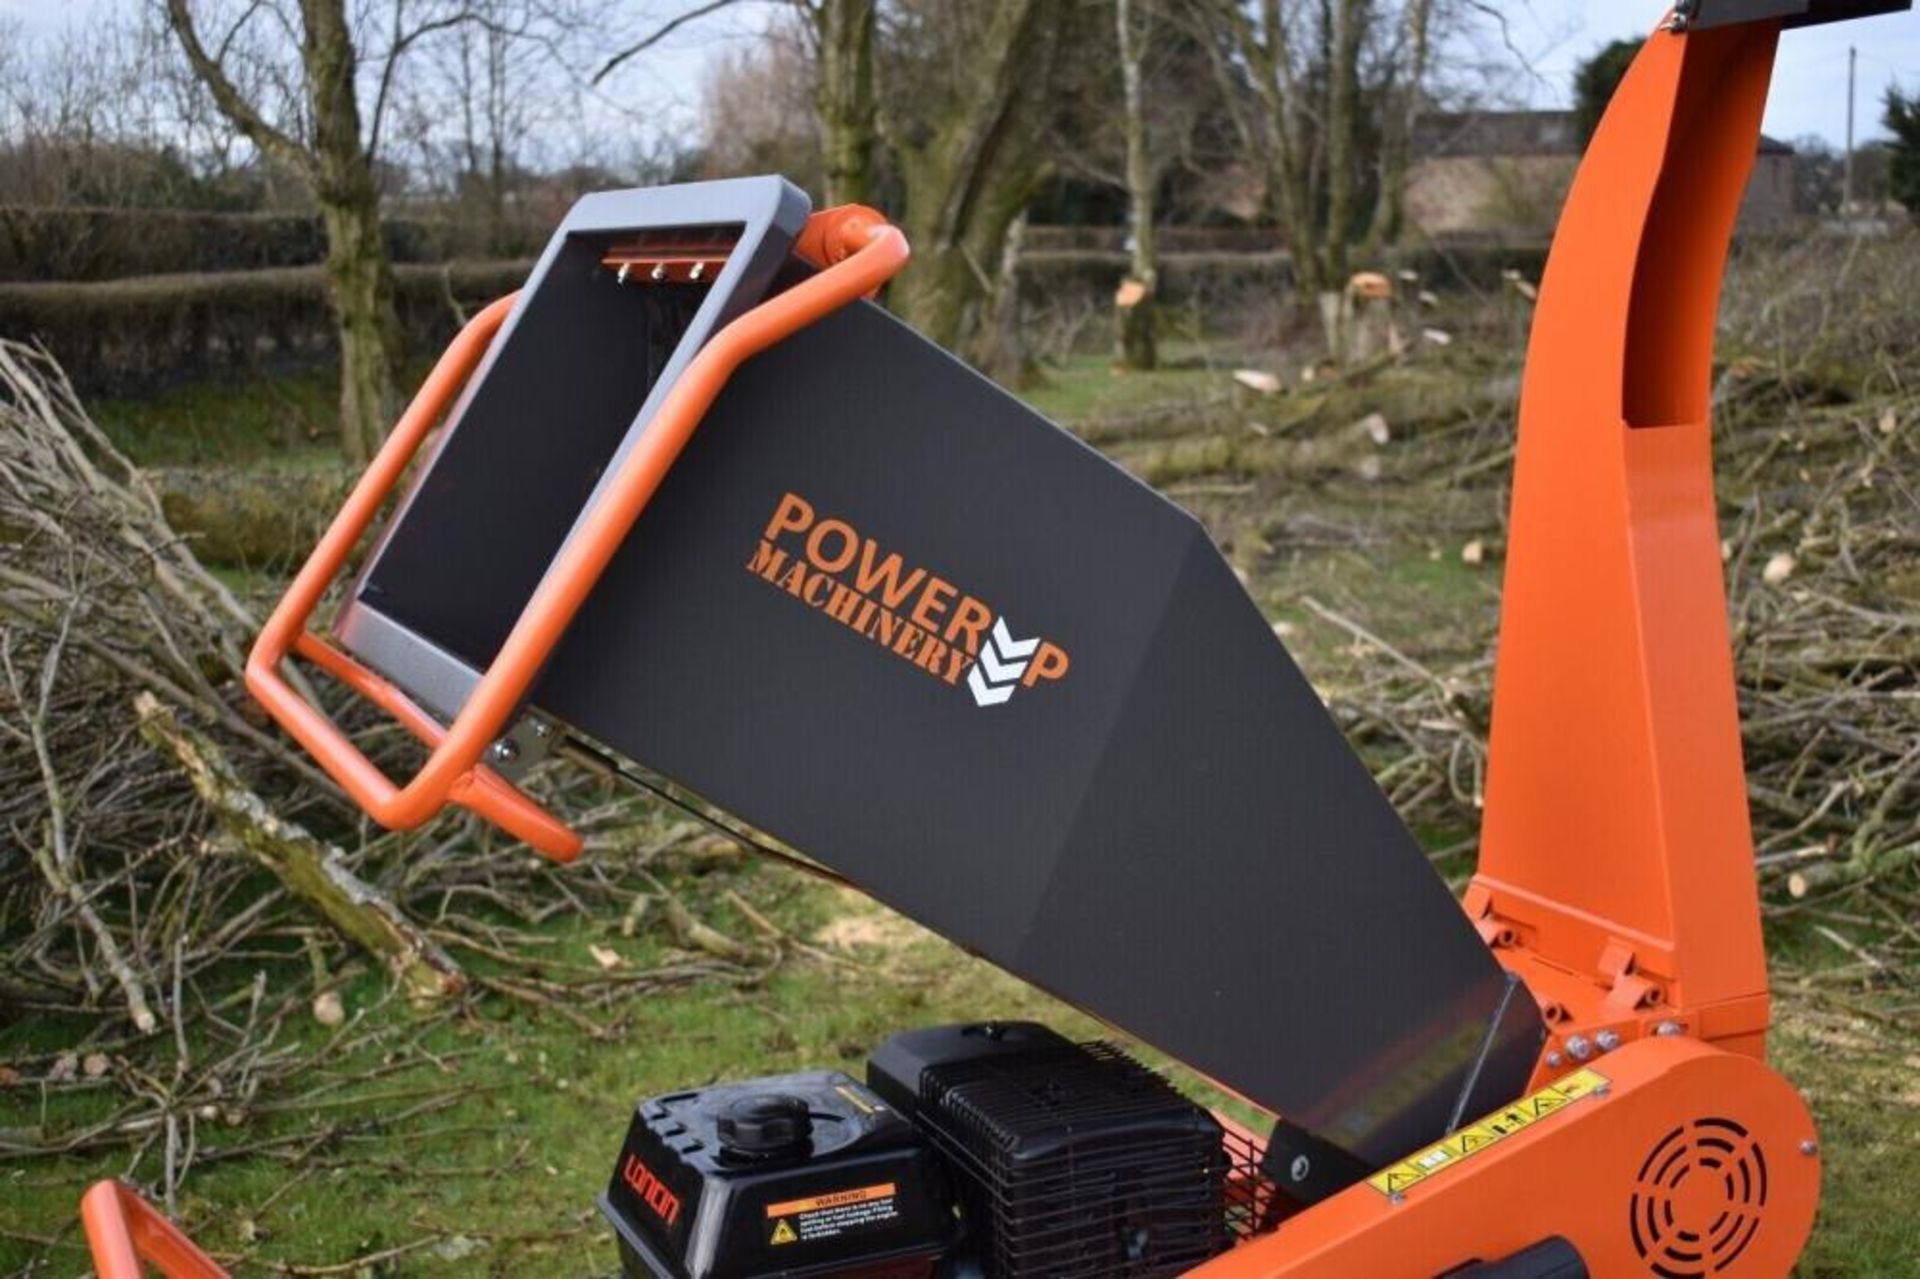 WOOD WARRIOR: 3.5" CAPACITY HEAVY-DUTY CHIPPER WITH 15HP PETROL POWER - Image 5 of 5